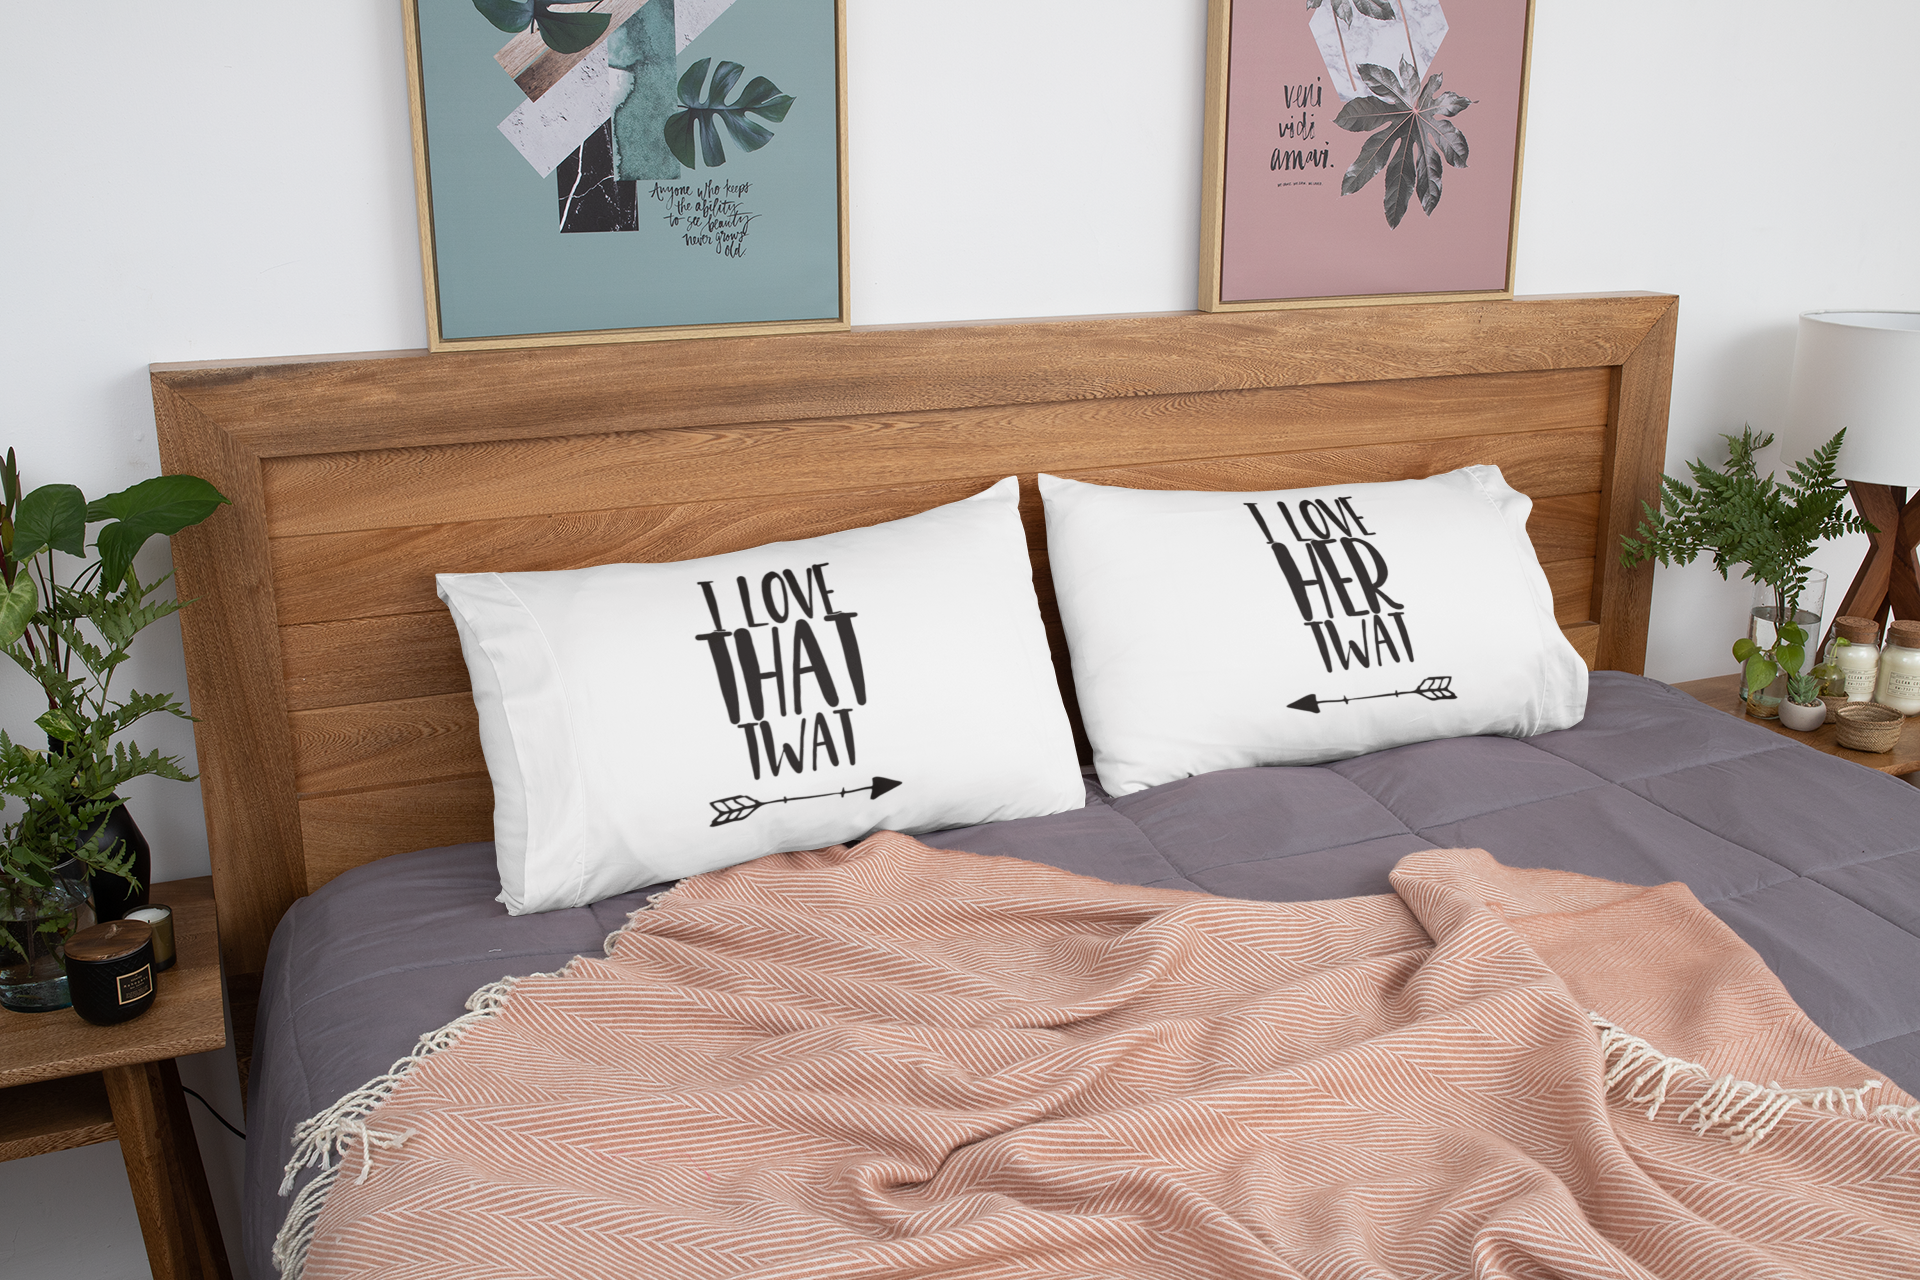 White pair of pillow cases on a made up bed, featuring funny quotes. The left reads 'i love that twat' with an arrow pointing to the right. The other pillow reads 'i love her twat' with an arrow pointing to the left.